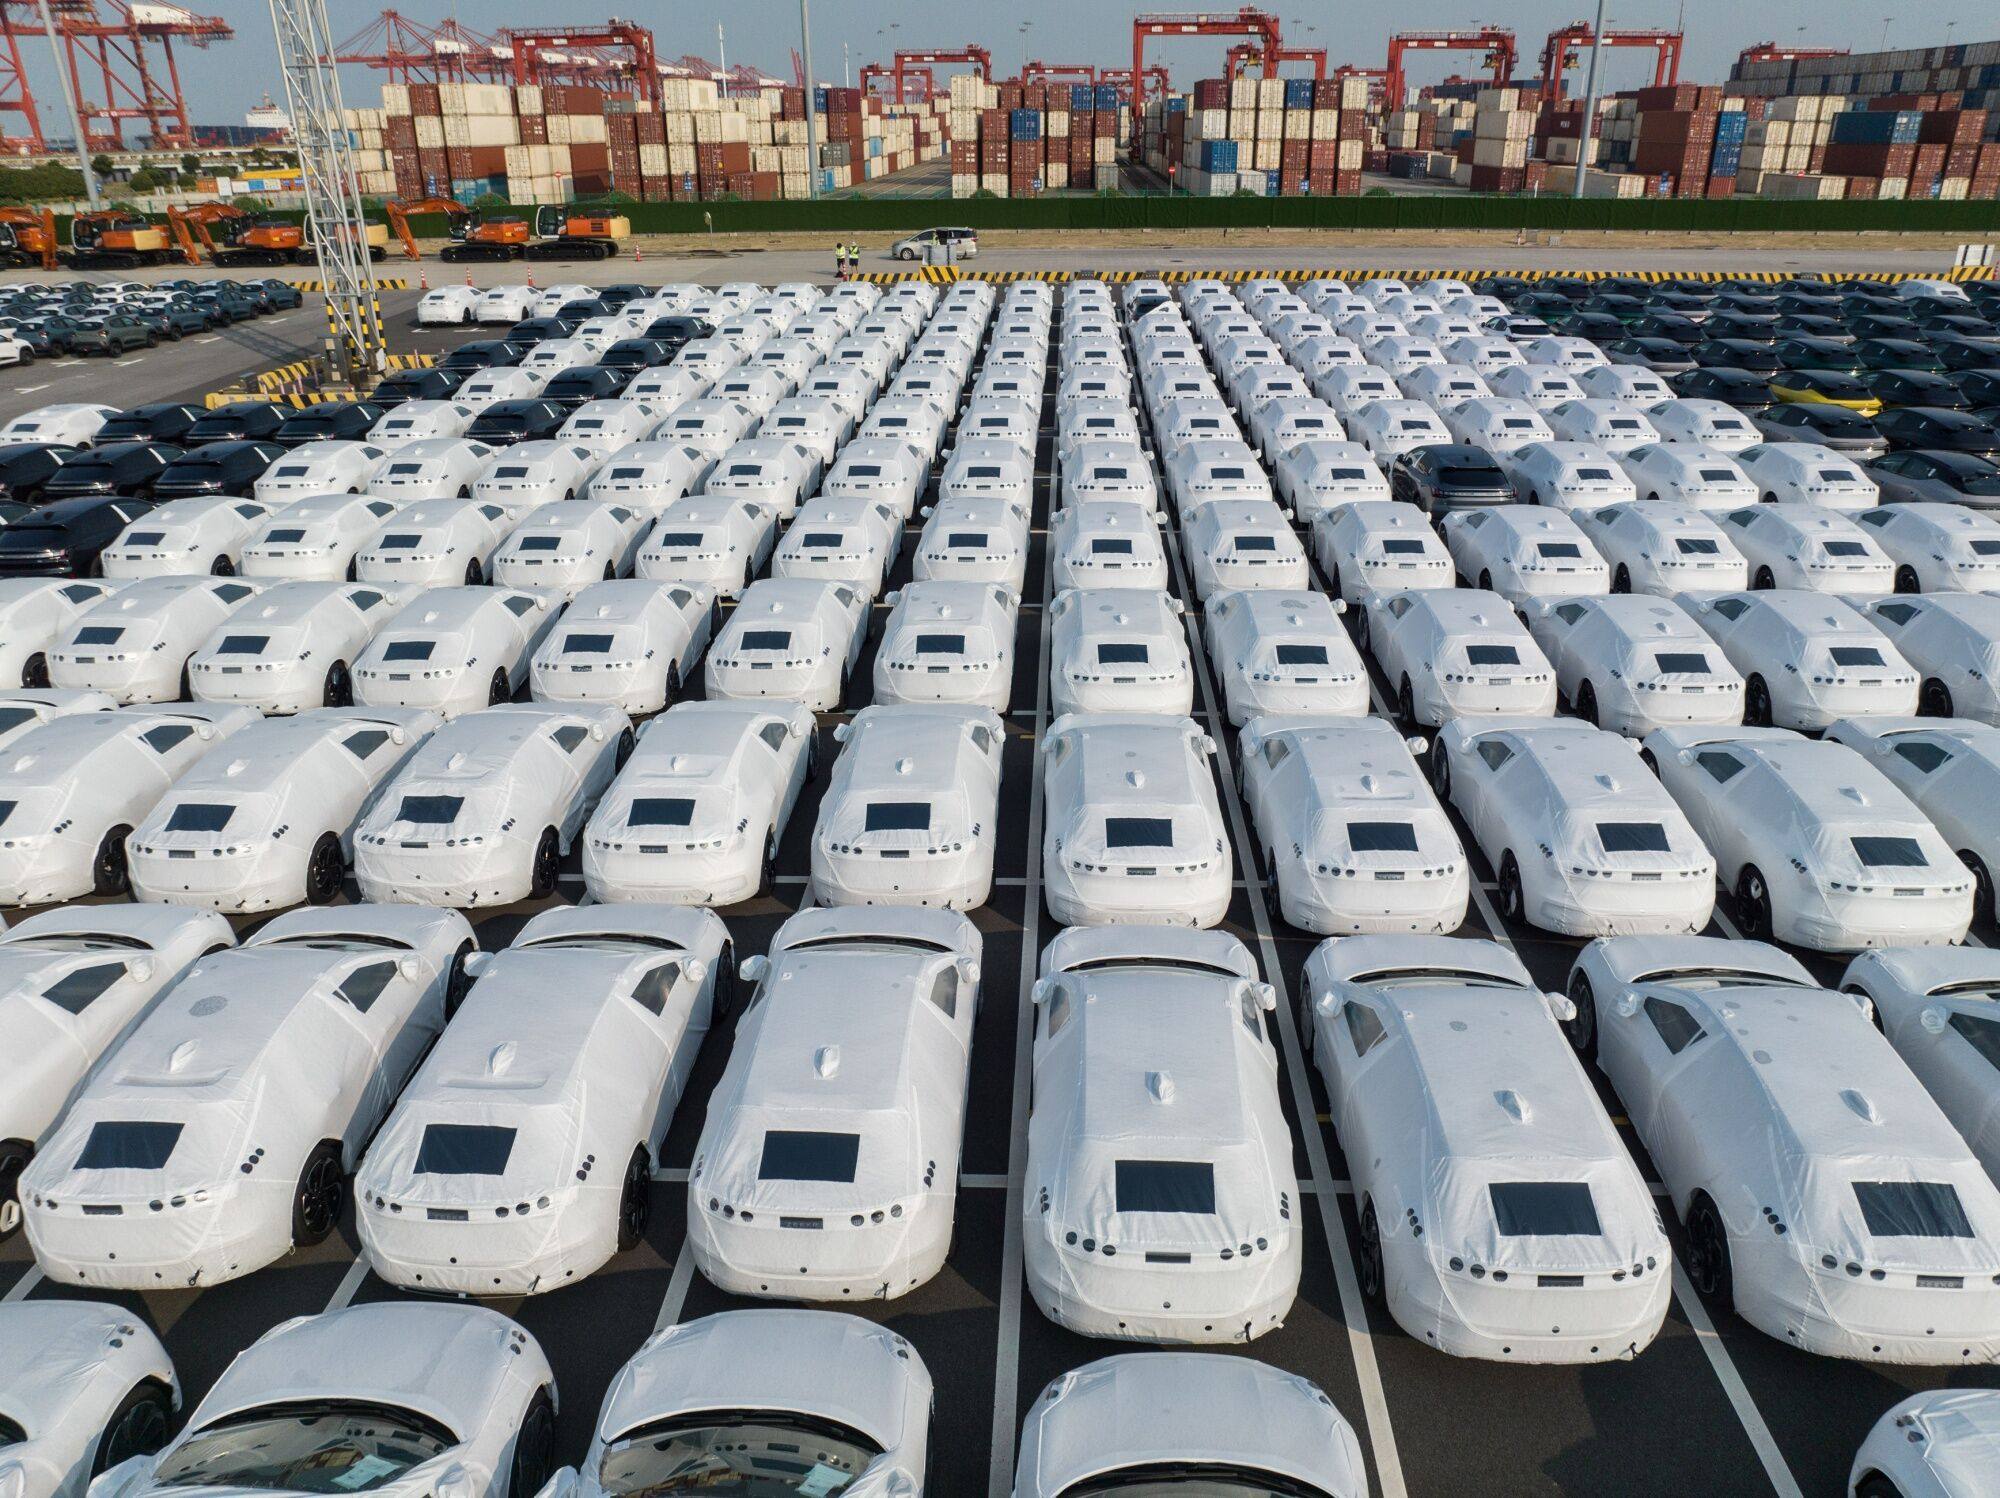 The inquiry was launched in October, with European Commission chief Ursula von der Leyen warning of a “flood” of Chinese EV imports coming to Europe. Photo: Bloomberg